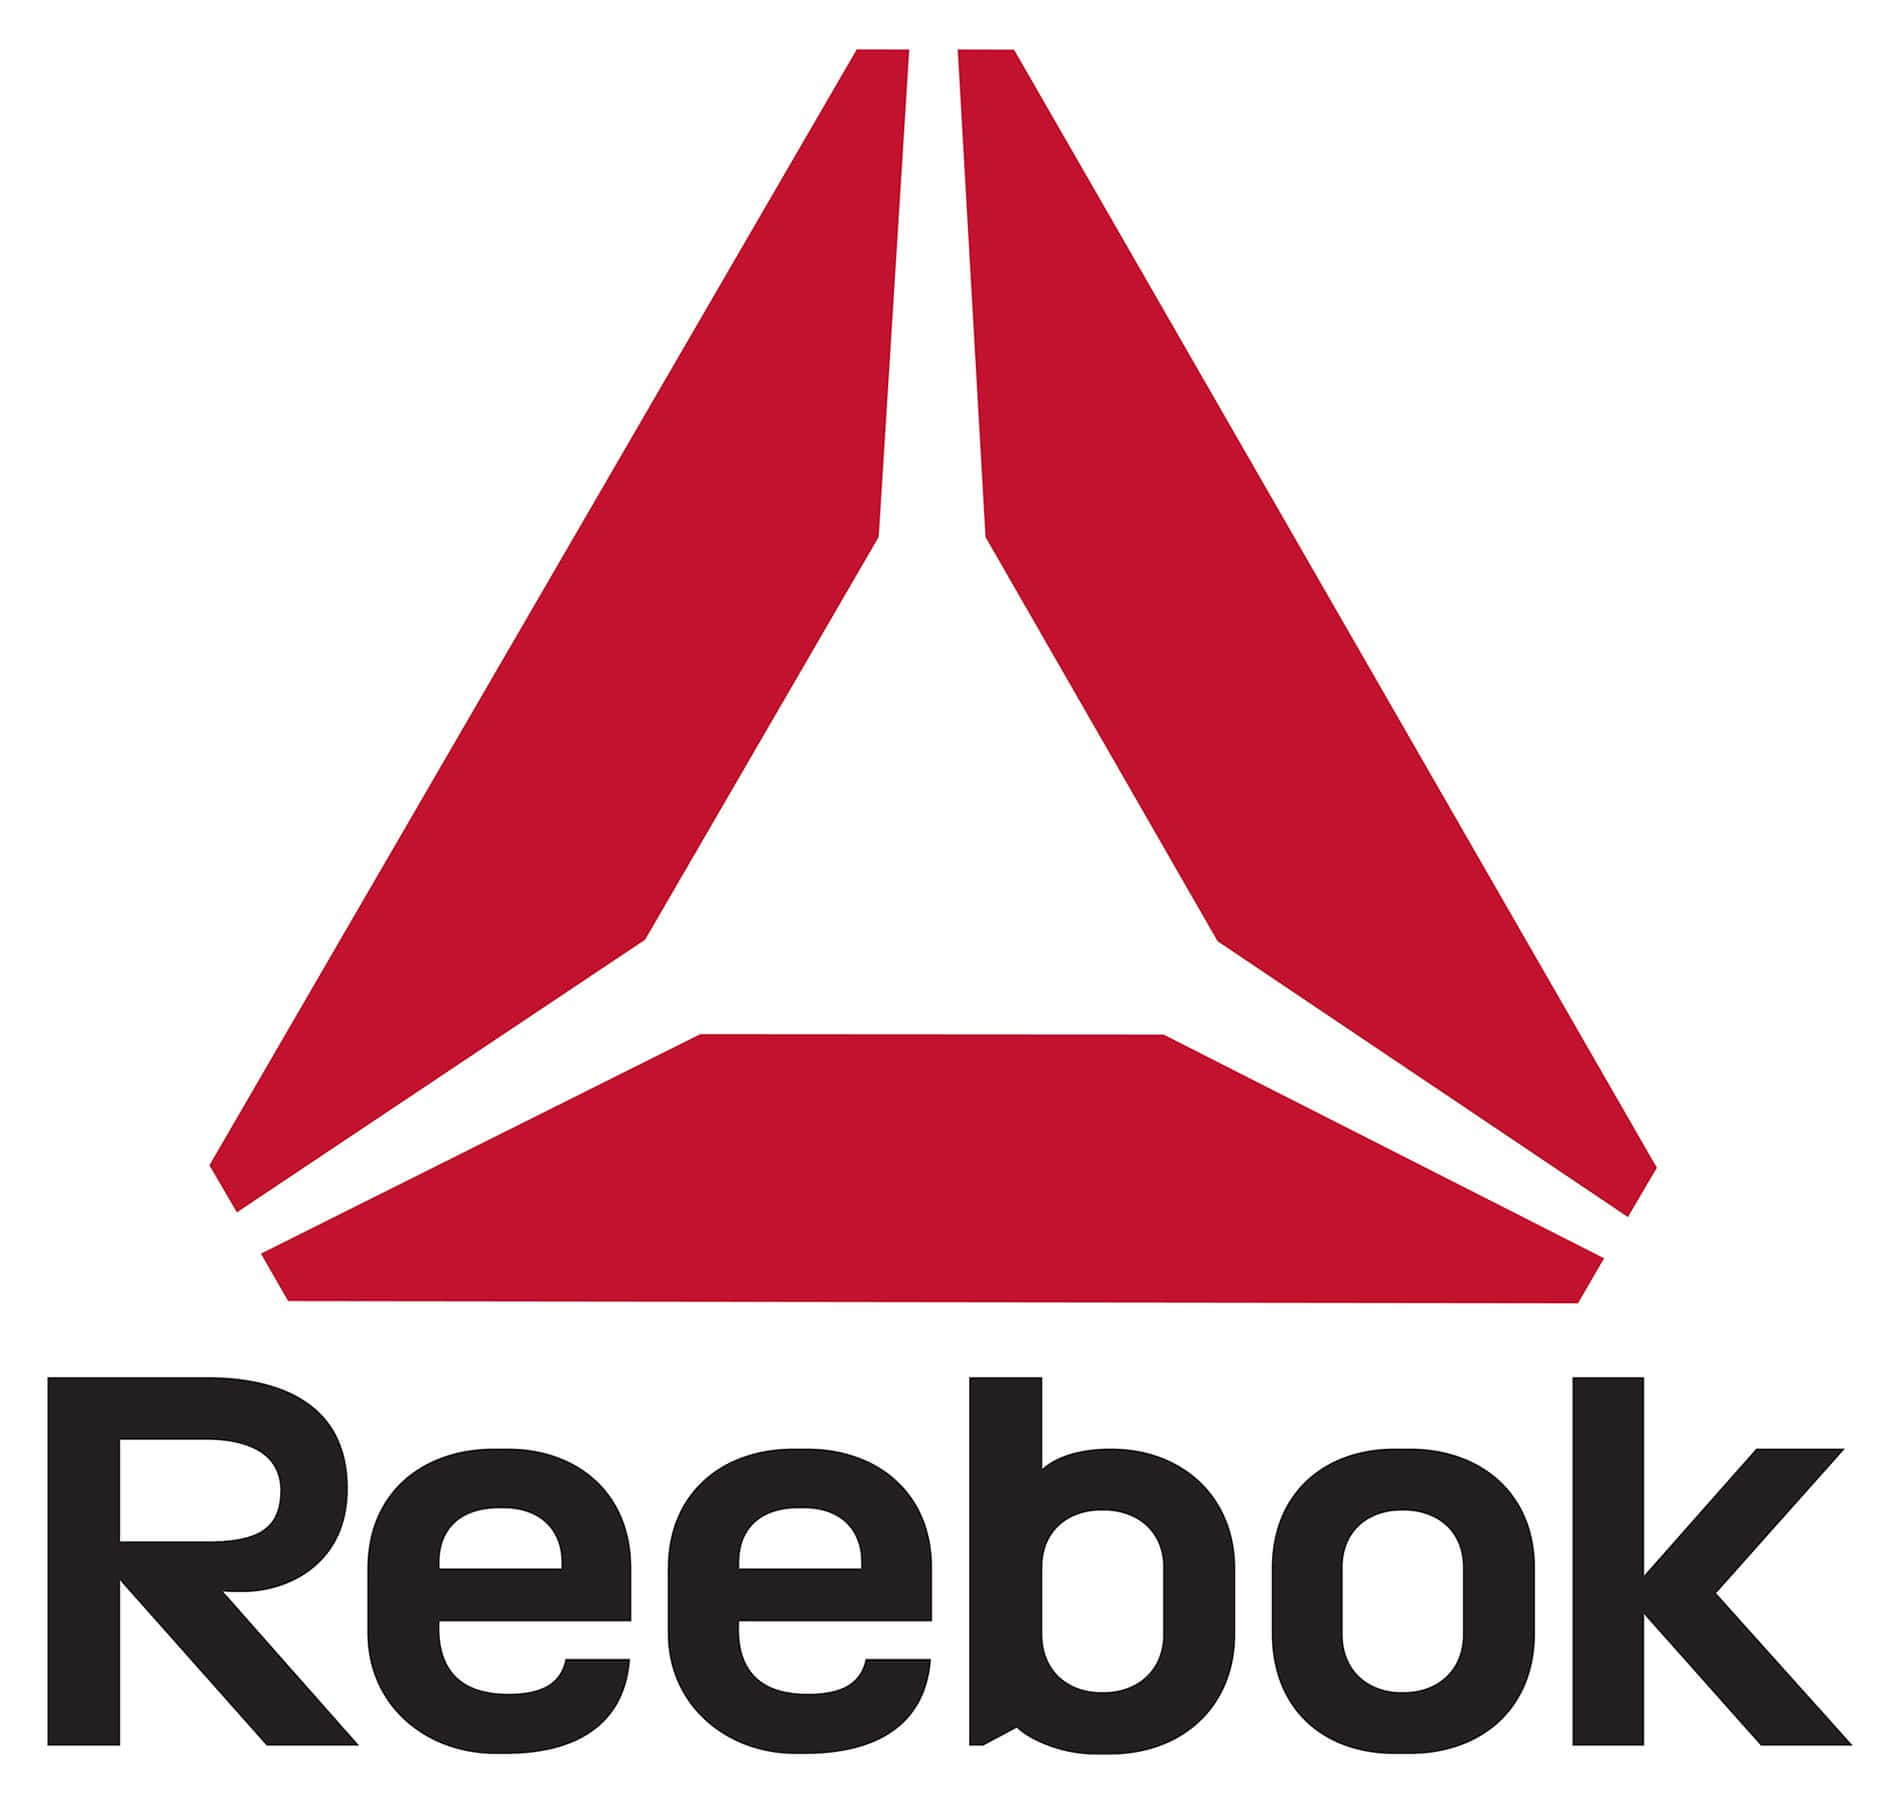 Stay on your feet with Reebok for all of your fitness needs.